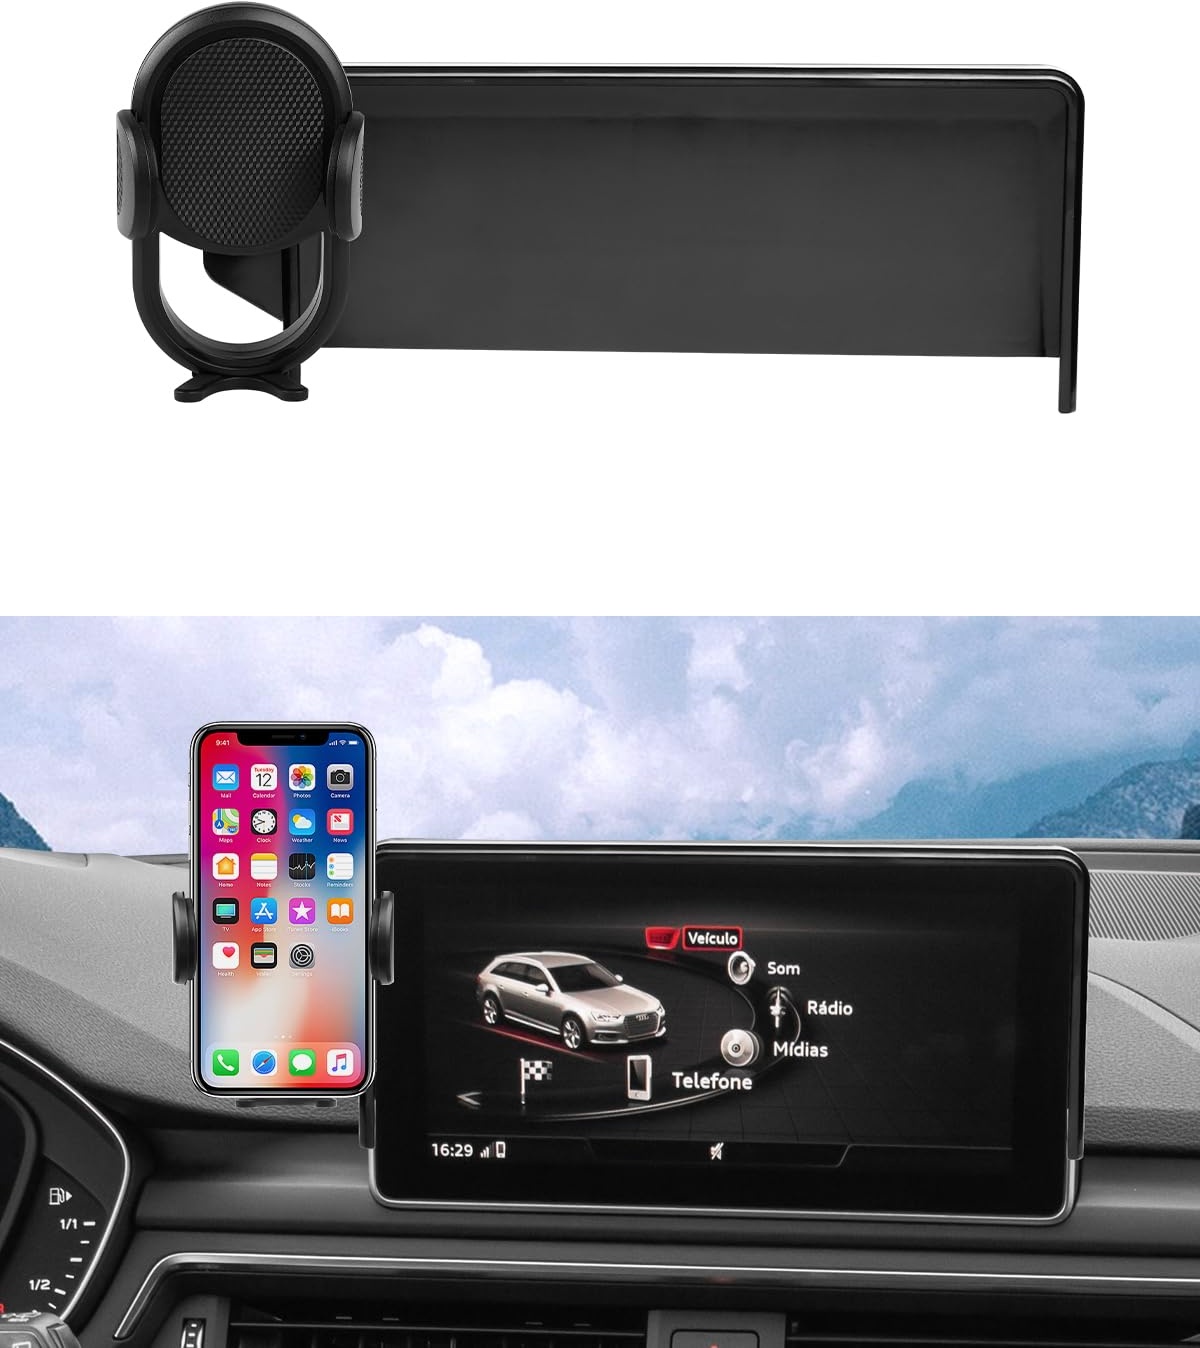 Autorder Custom Fit for Car Phone Holder 22017-2019 Audi A4/2018-2020 Q5 Accessories Phone Mount 8.3 inch Screen Cell Phone Automobile Cradles Hands-Free 360 Degree Rotation